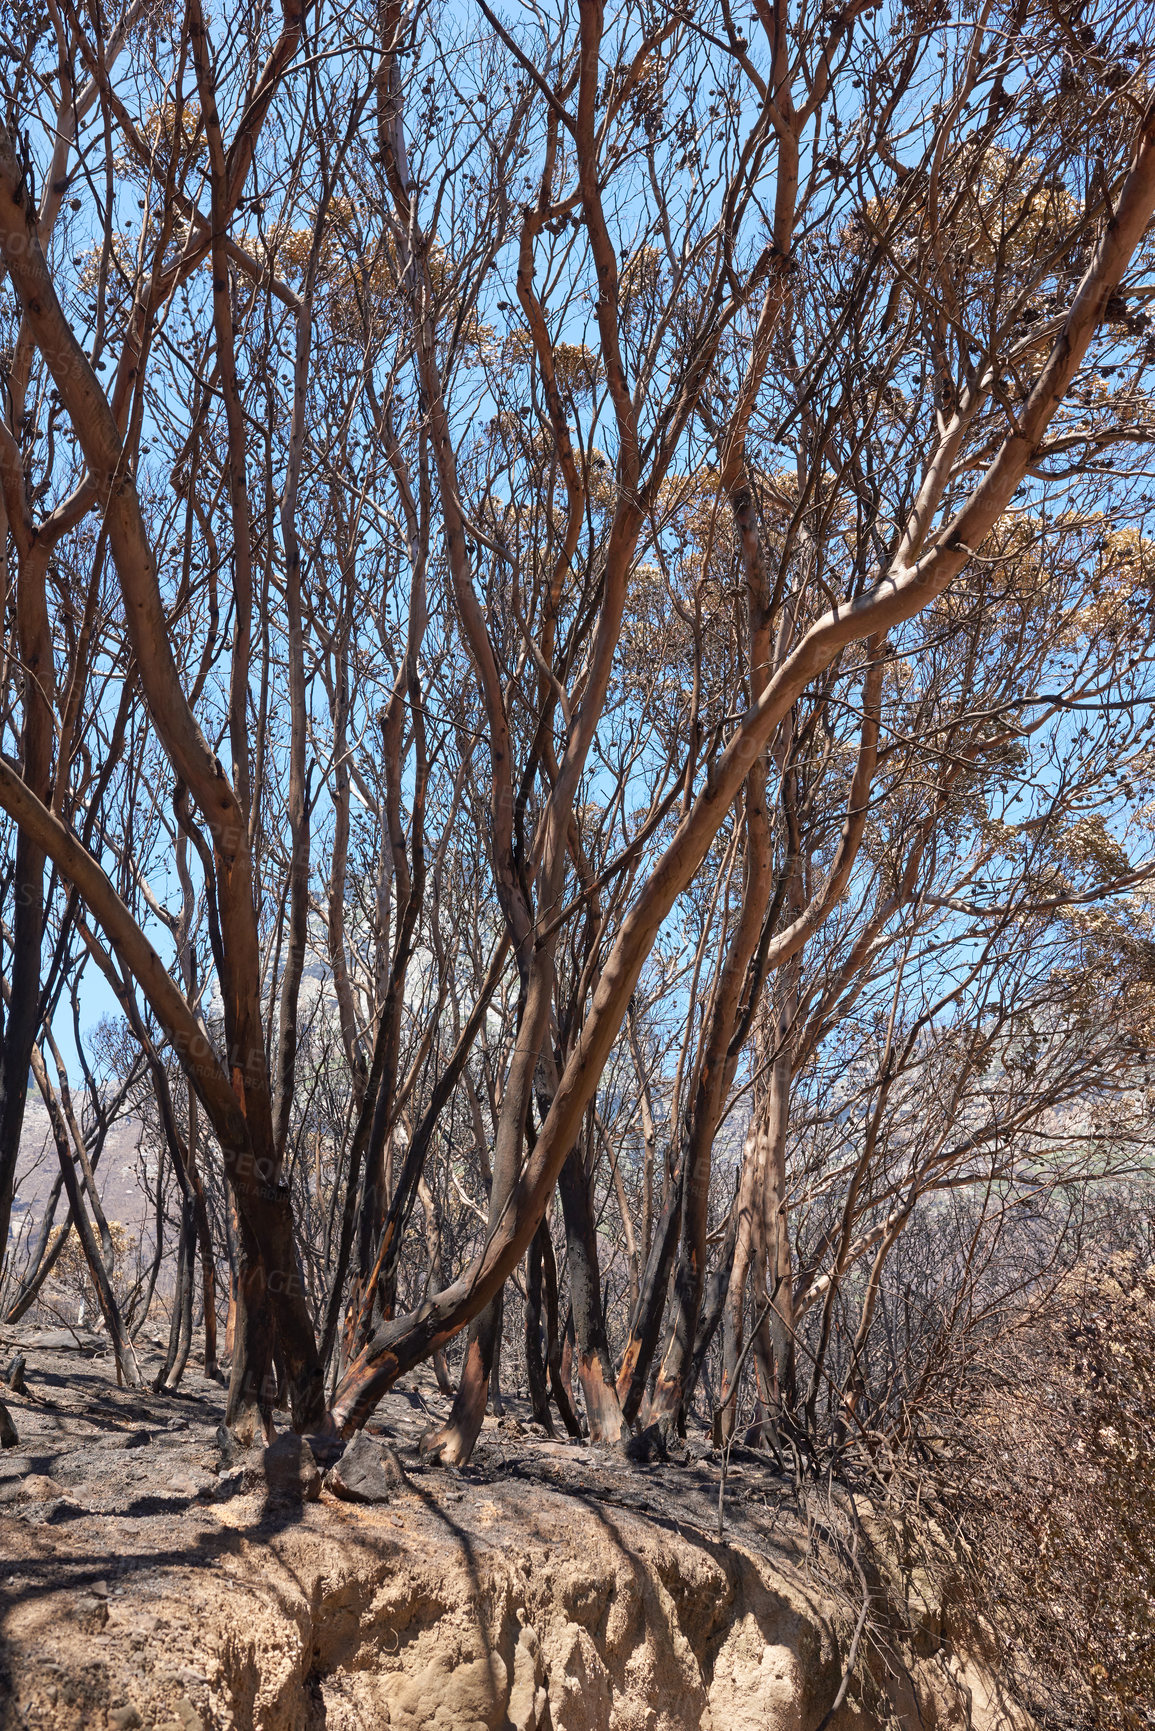 Buy stock photo Wildfire burnt forest trees, park bench in remote woods, nature reserve. Destruction aftermath, deforestation from uncontrollable nature bushfire, human error, global warming. Dry arid barren plants